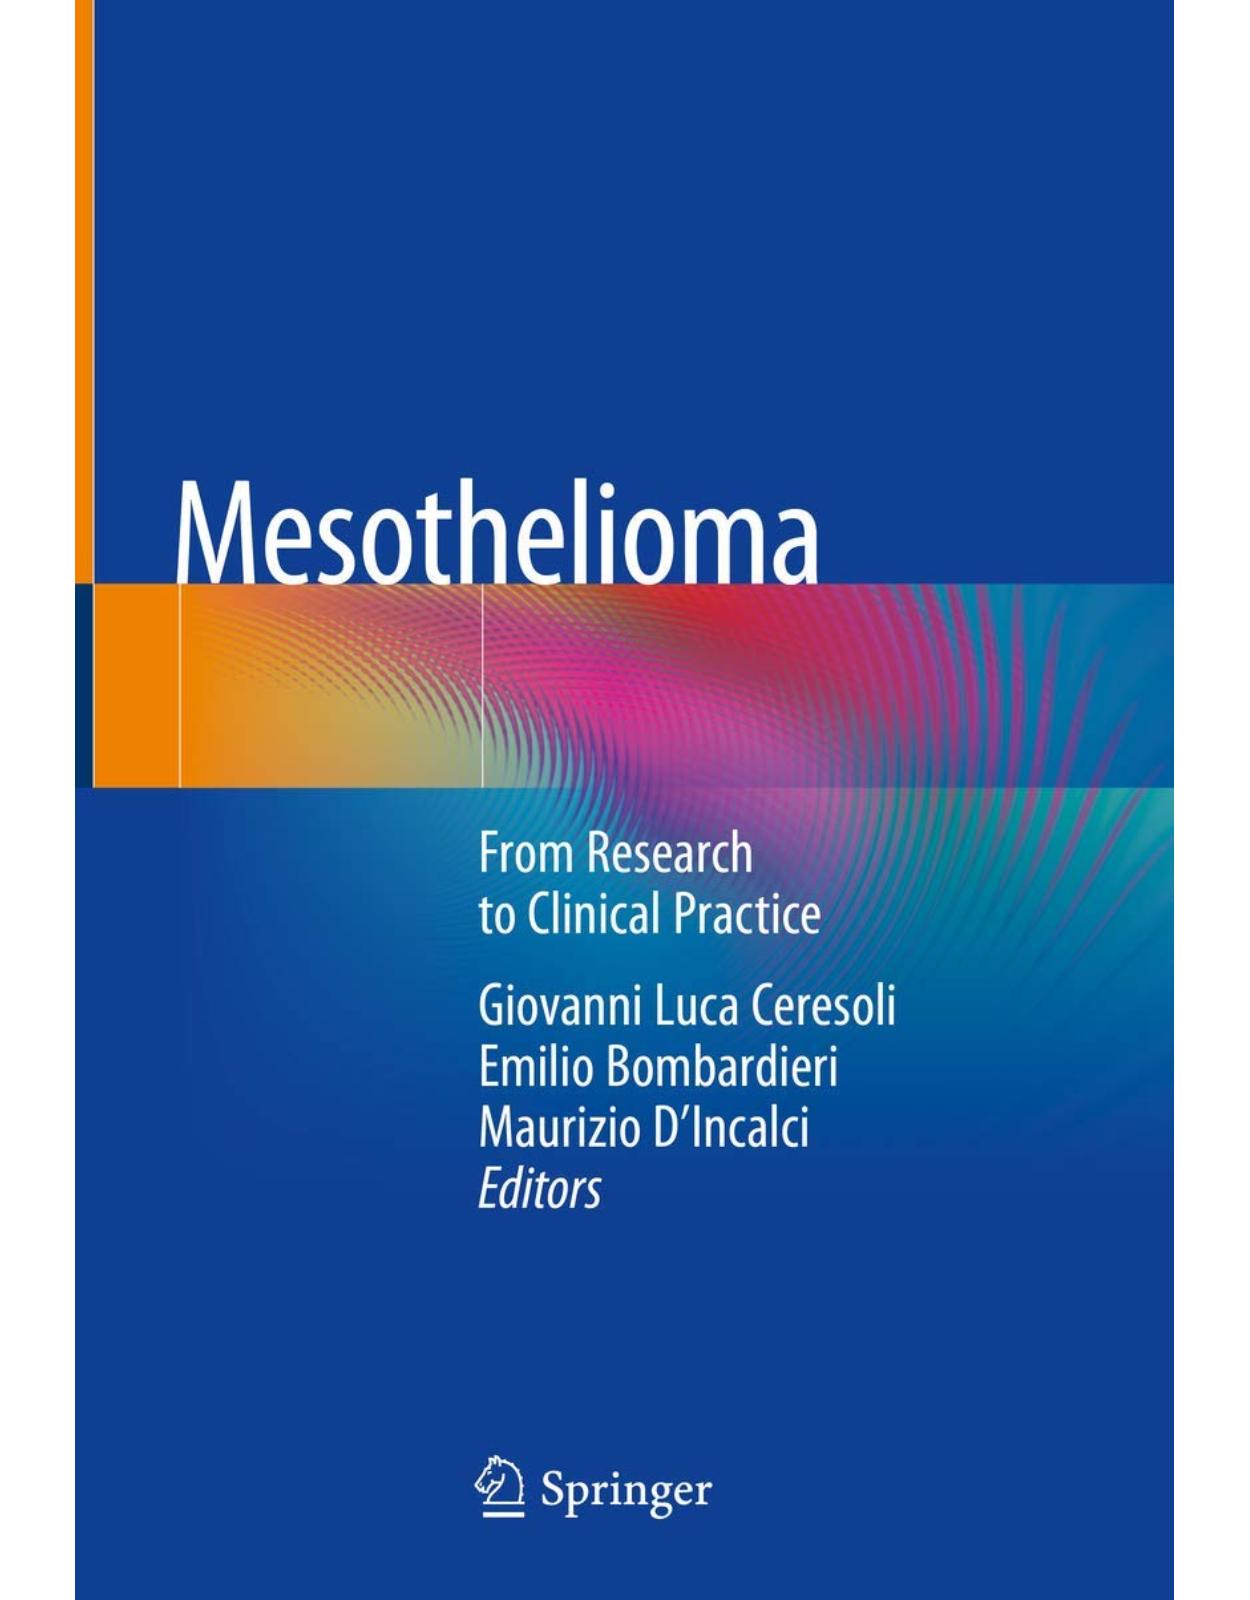 Mesothelioma. From Research to Clinical Practice